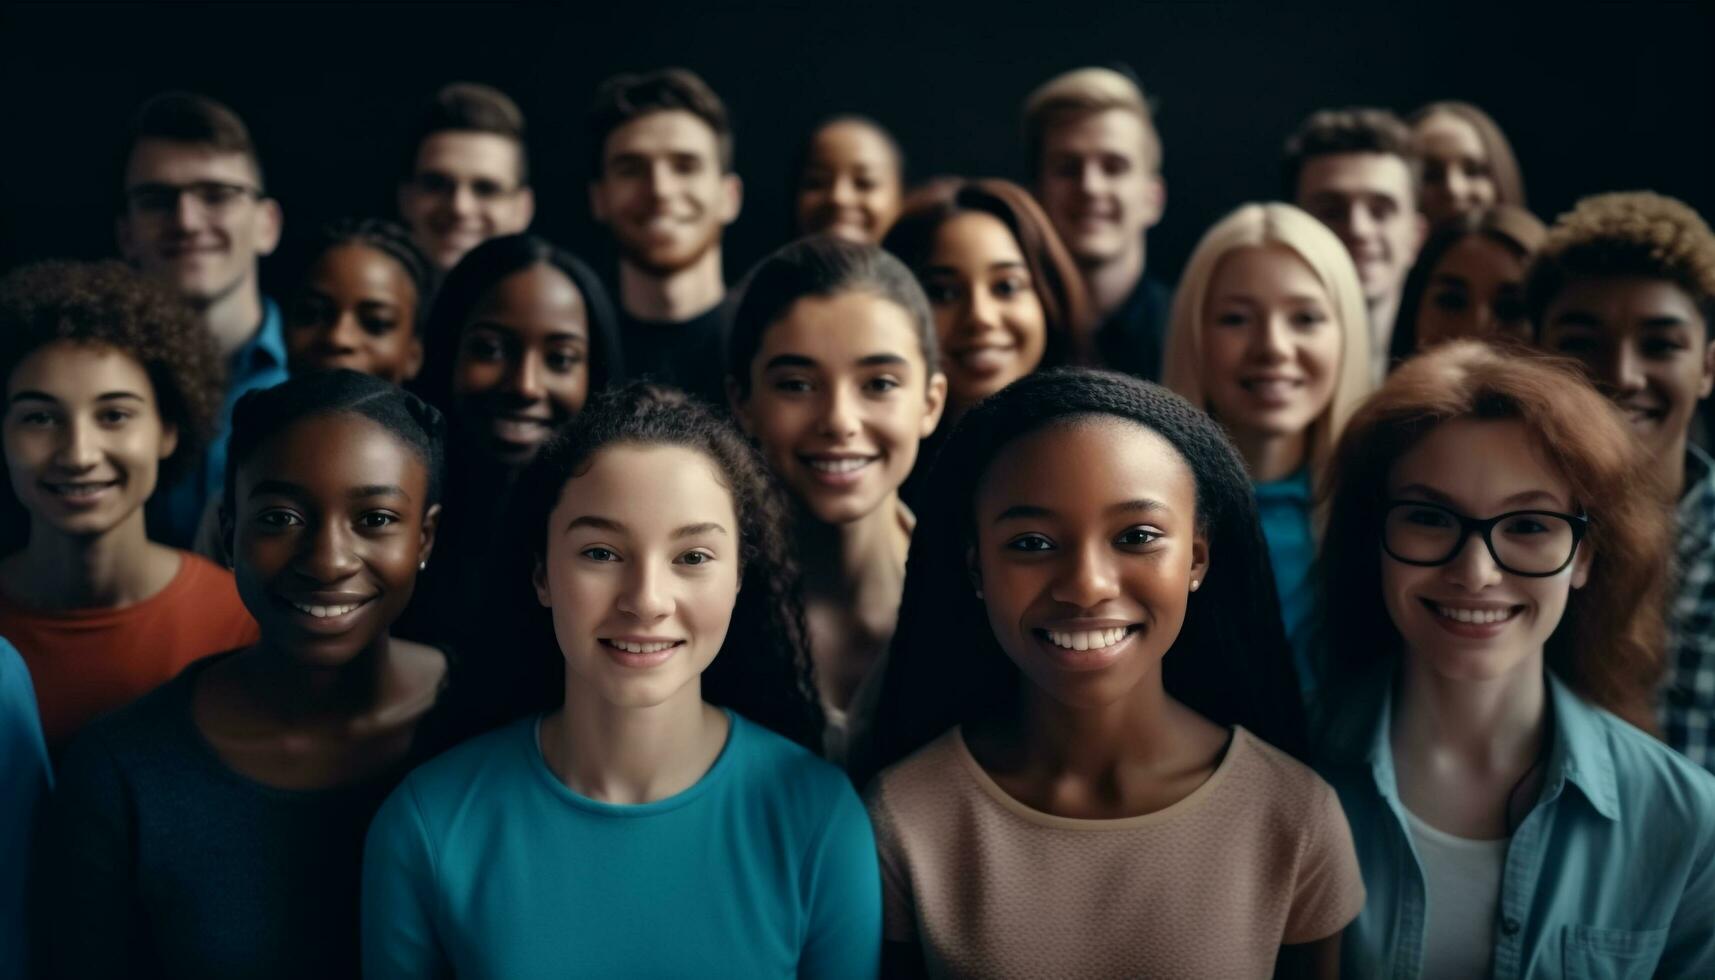 A cheerful group of students smiling, looking at camera together generated by AI photo